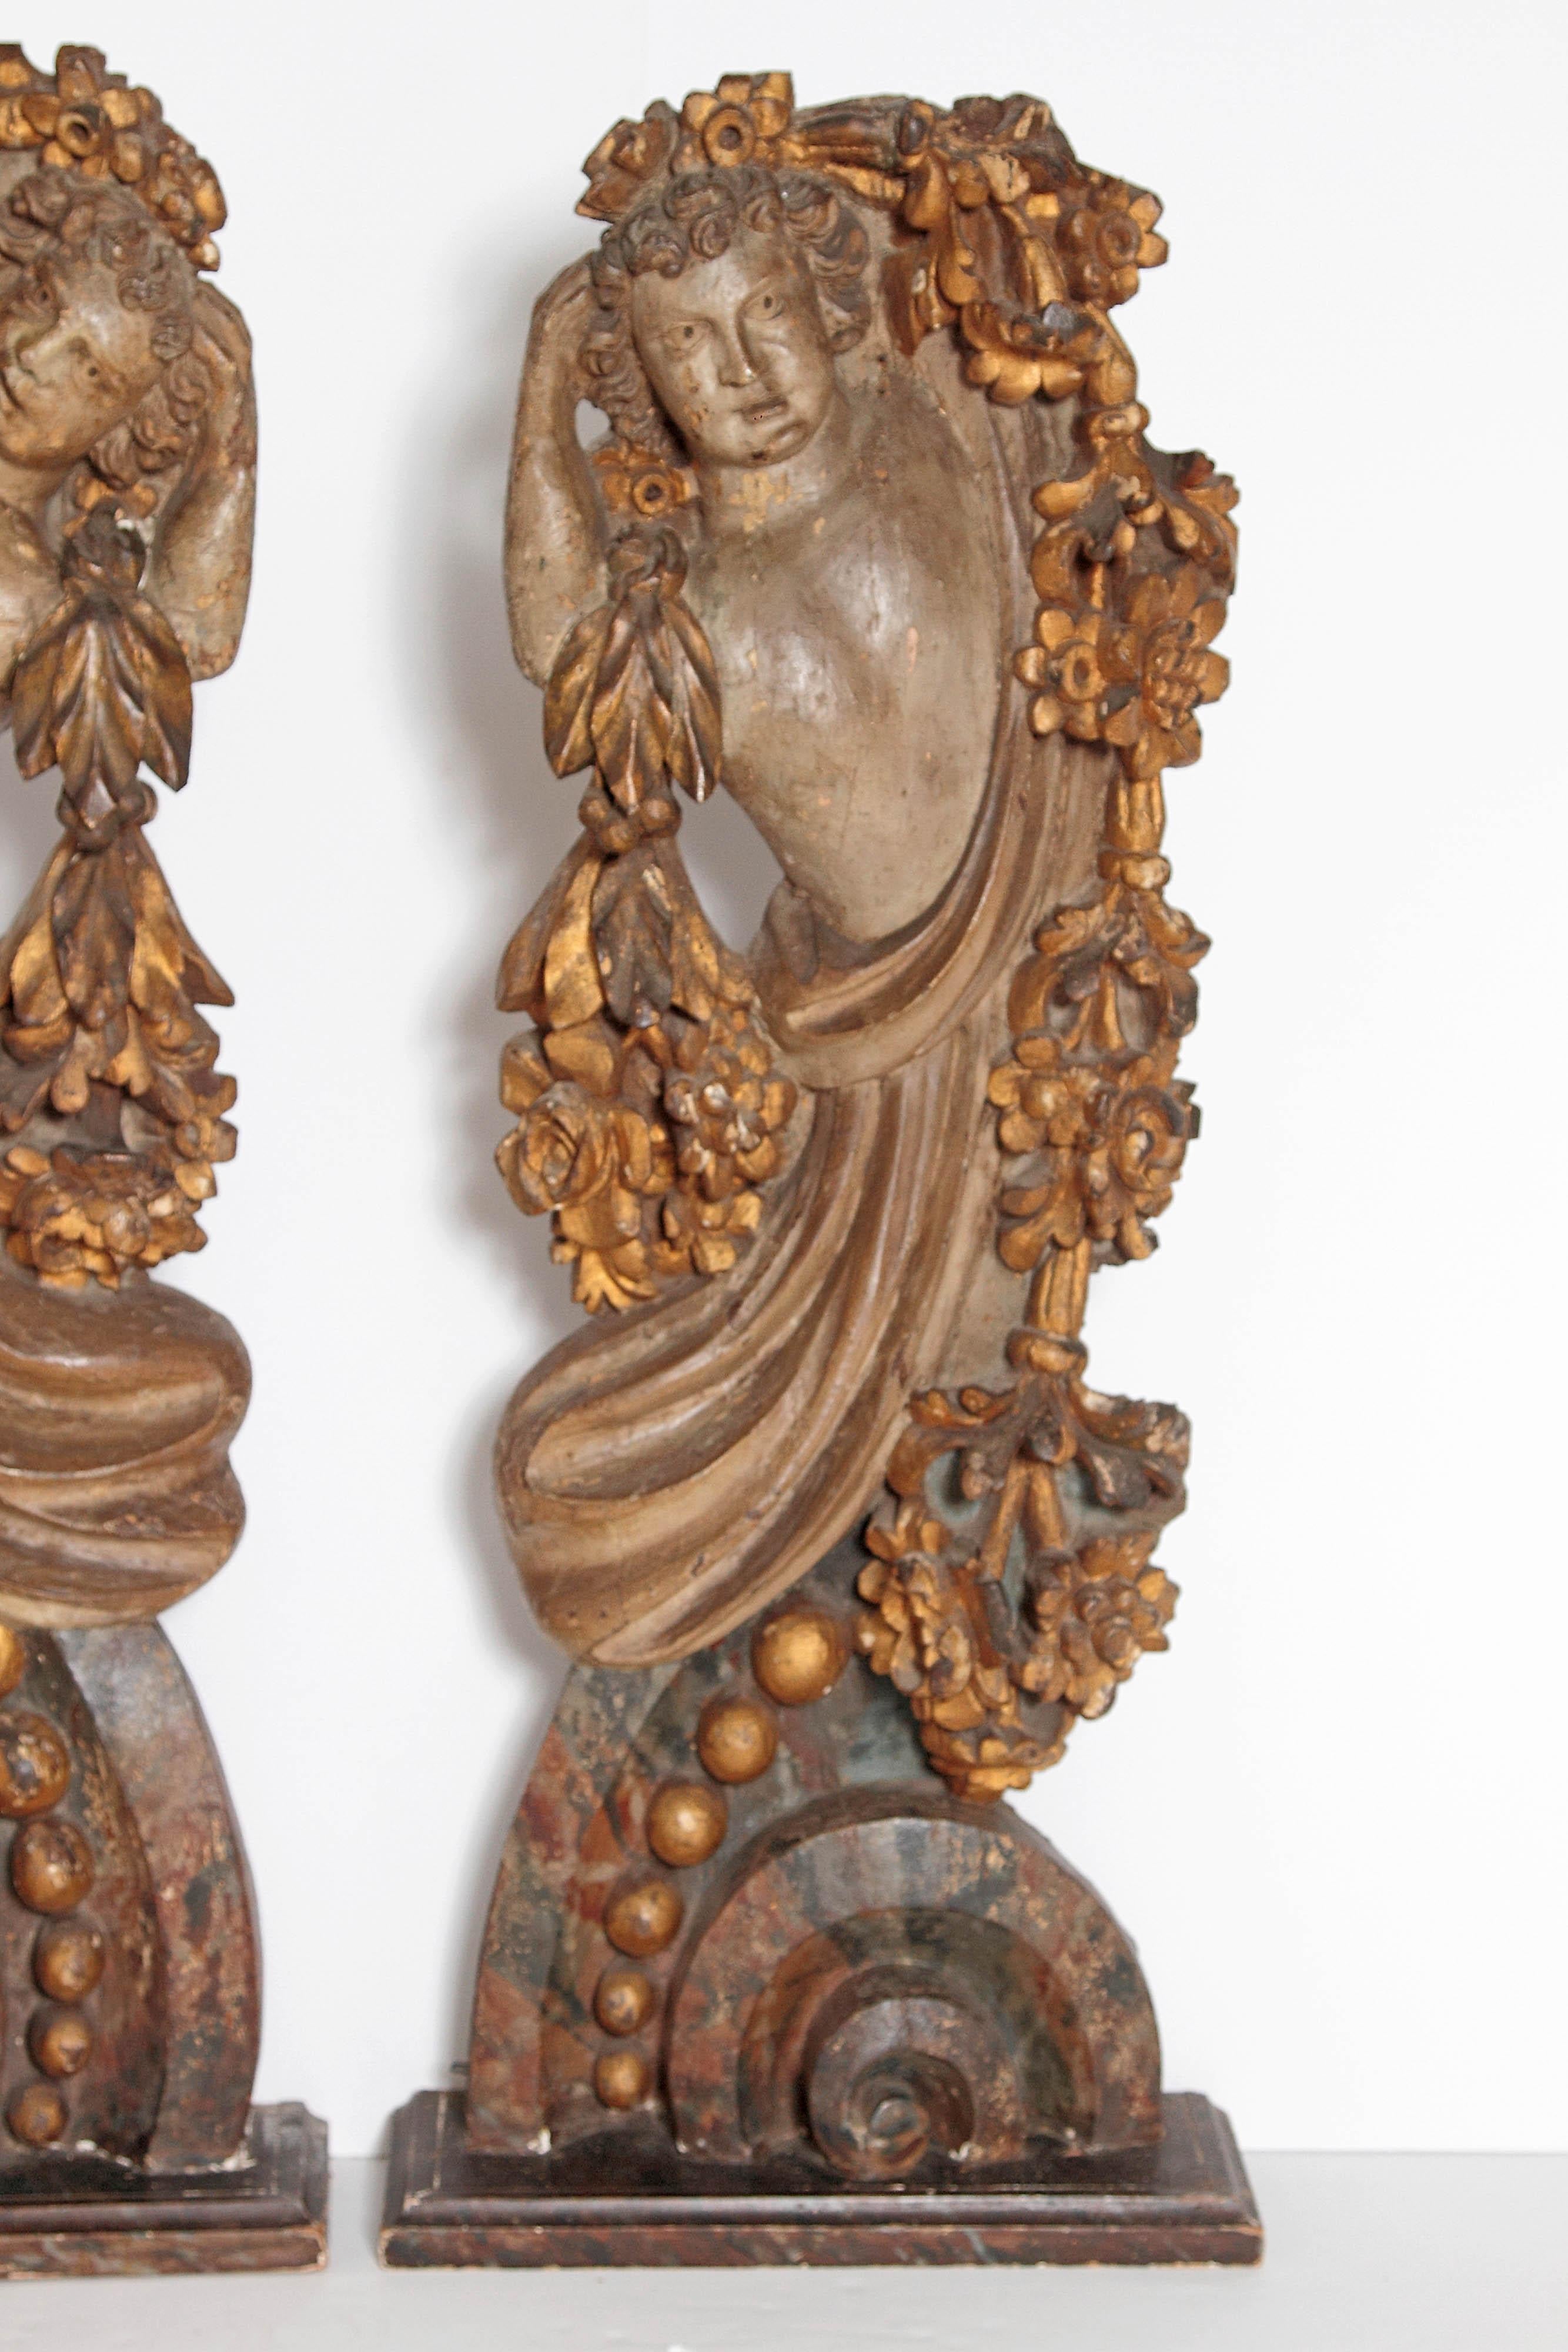 A pair of large freestanding Italian carved and polychromed figures or male torsos or upper bodies draped in garlands of leaves and flowers (architectural fragments, supports, or appliques) late 19th century, Italy.